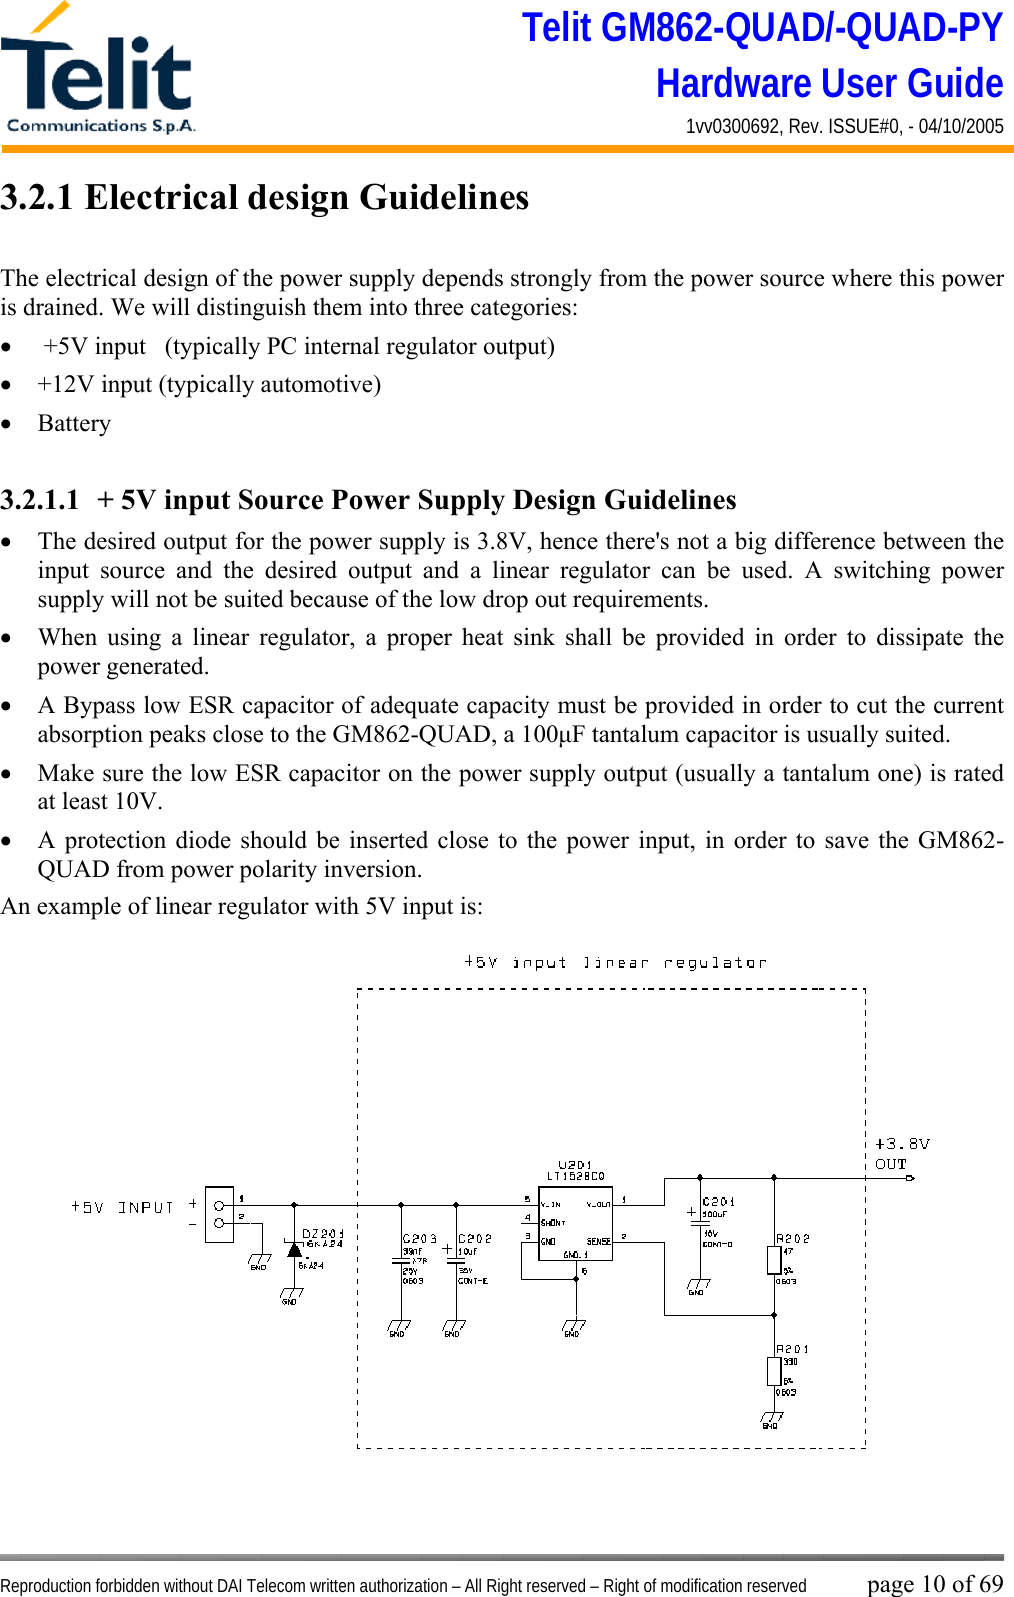 Telit GM862-QUAD/-QUAD-PY Hardware User Guide 1vv0300692, Rev. ISSUE#0, - 04/10/2005   Reproduction forbidden without DAI Telecom written authorization – All Right reserved – Right of modification reserved page 10 of 69 3.2.1 Electrical design Guidelines  The electrical design of the power supply depends strongly from the power source where this power is drained. We will distinguish them into three categories: •   +5V input   (typically PC internal regulator output) •  +12V input (typically automotive) •  Battery  3.2.1.1  + 5V input Source Power Supply Design Guidelines •  The desired output for the power supply is 3.8V, hence there&apos;s not a big difference between the input source and the desired output and a linear regulator can be used. A switching power supply will not be suited because of the low drop out requirements. •  When using a linear regulator, a proper heat sink shall be provided in order to dissipate the power generated. •  A Bypass low ESR capacitor of adequate capacity must be provided in order to cut the current absorption peaks close to the GM862-QUAD, a 100μF tantalum capacitor is usually suited. •  Make sure the low ESR capacitor on the power supply output (usually a tantalum one) is rated at least 10V. •  A protection diode should be inserted close to the power input, in order to save the GM862-QUAD from power polarity inversion. An example of linear regulator with 5V input is: 